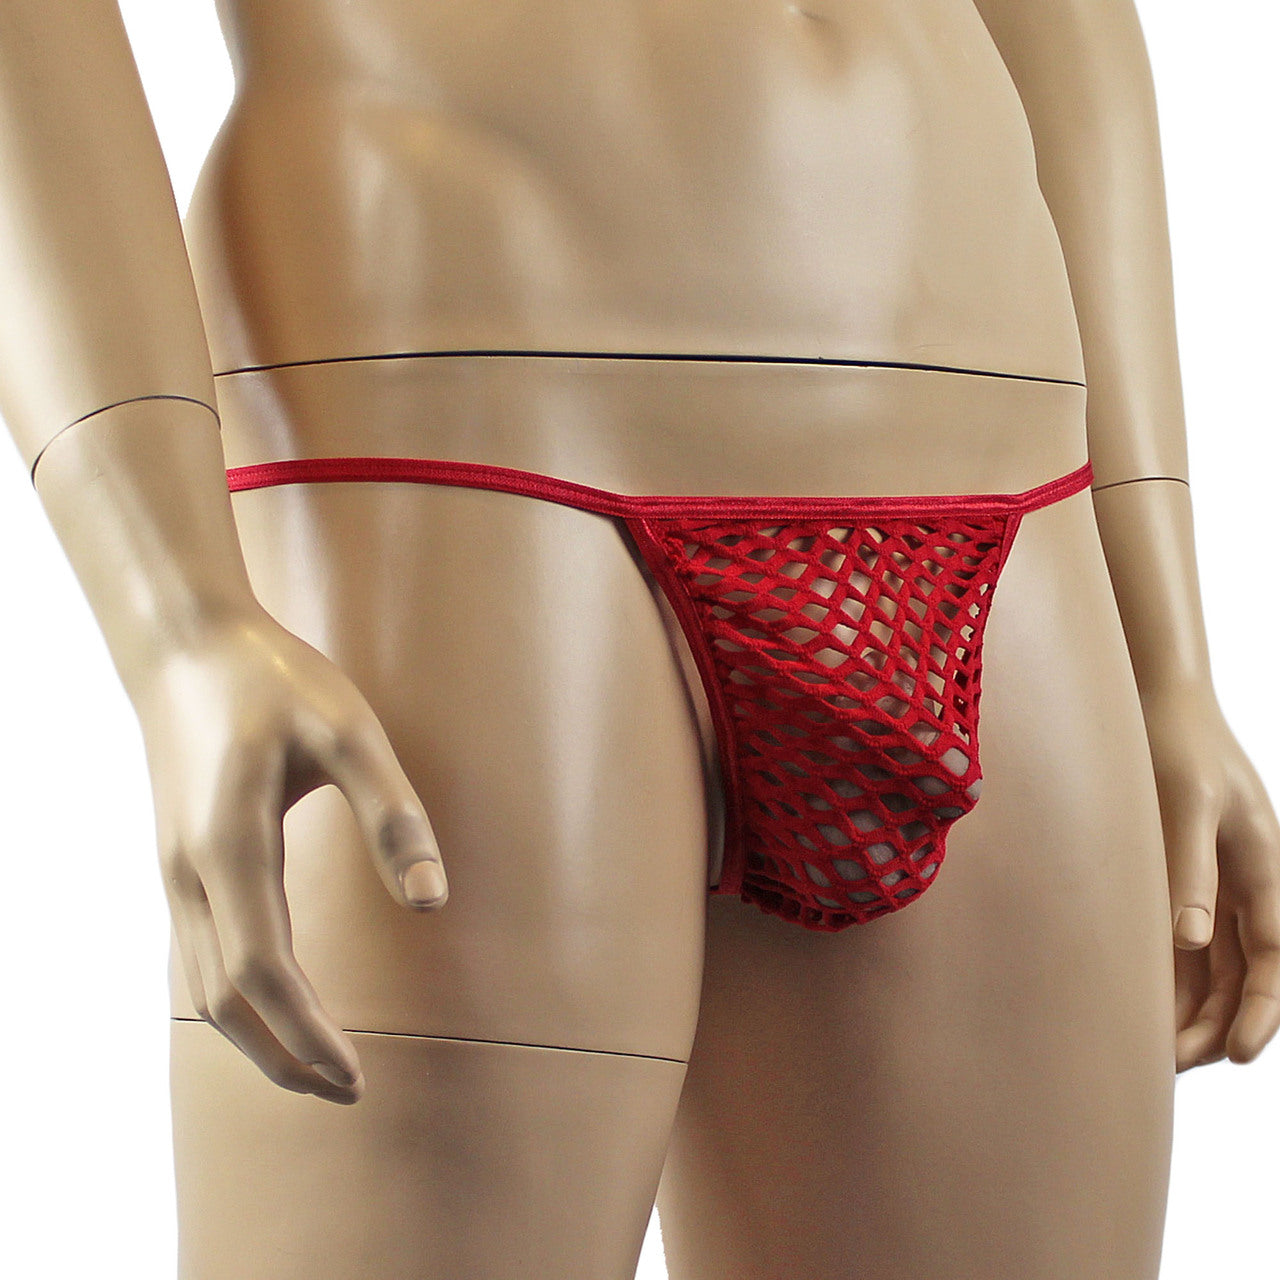 Mens Big Net Lingerie See-through Pouch G string Red